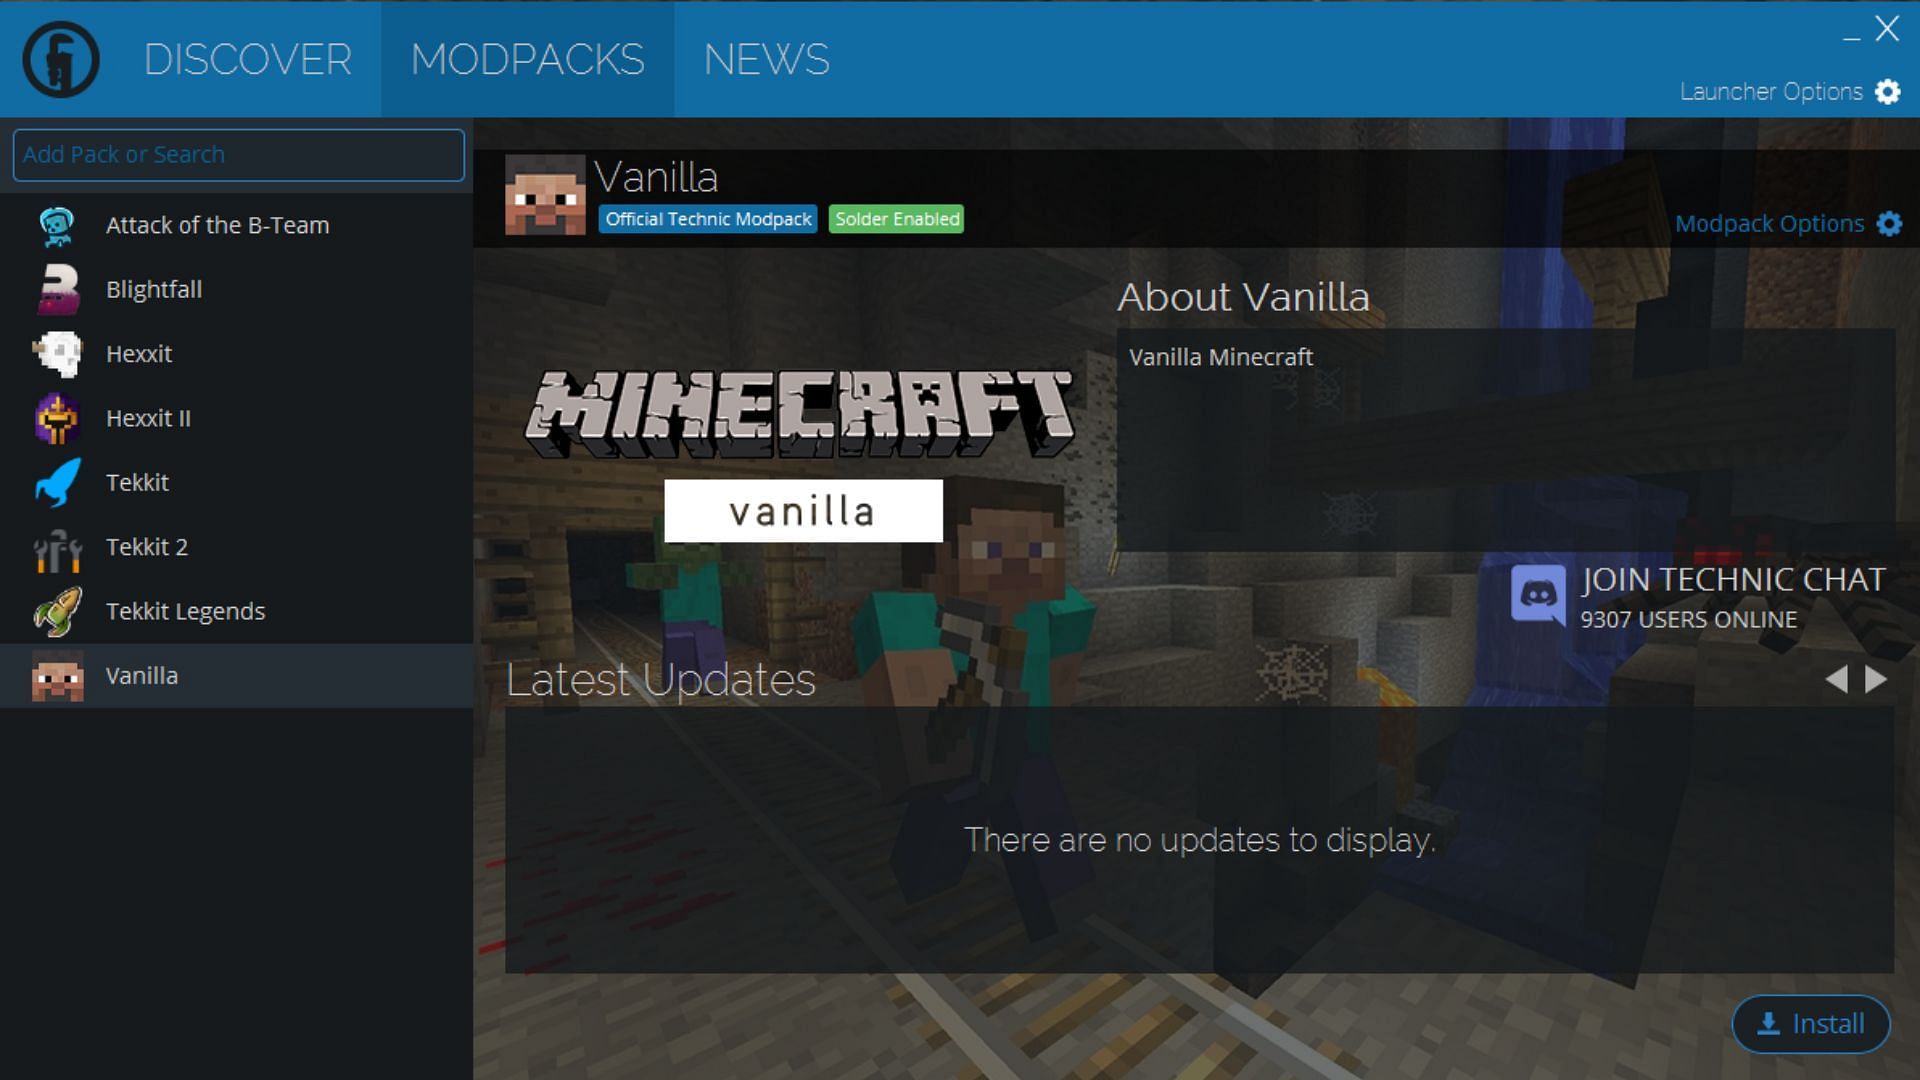 You can search from a plethora of Minecraft modpacks supported by the launcher and install it without any hassle (Image via Sportskeeda)